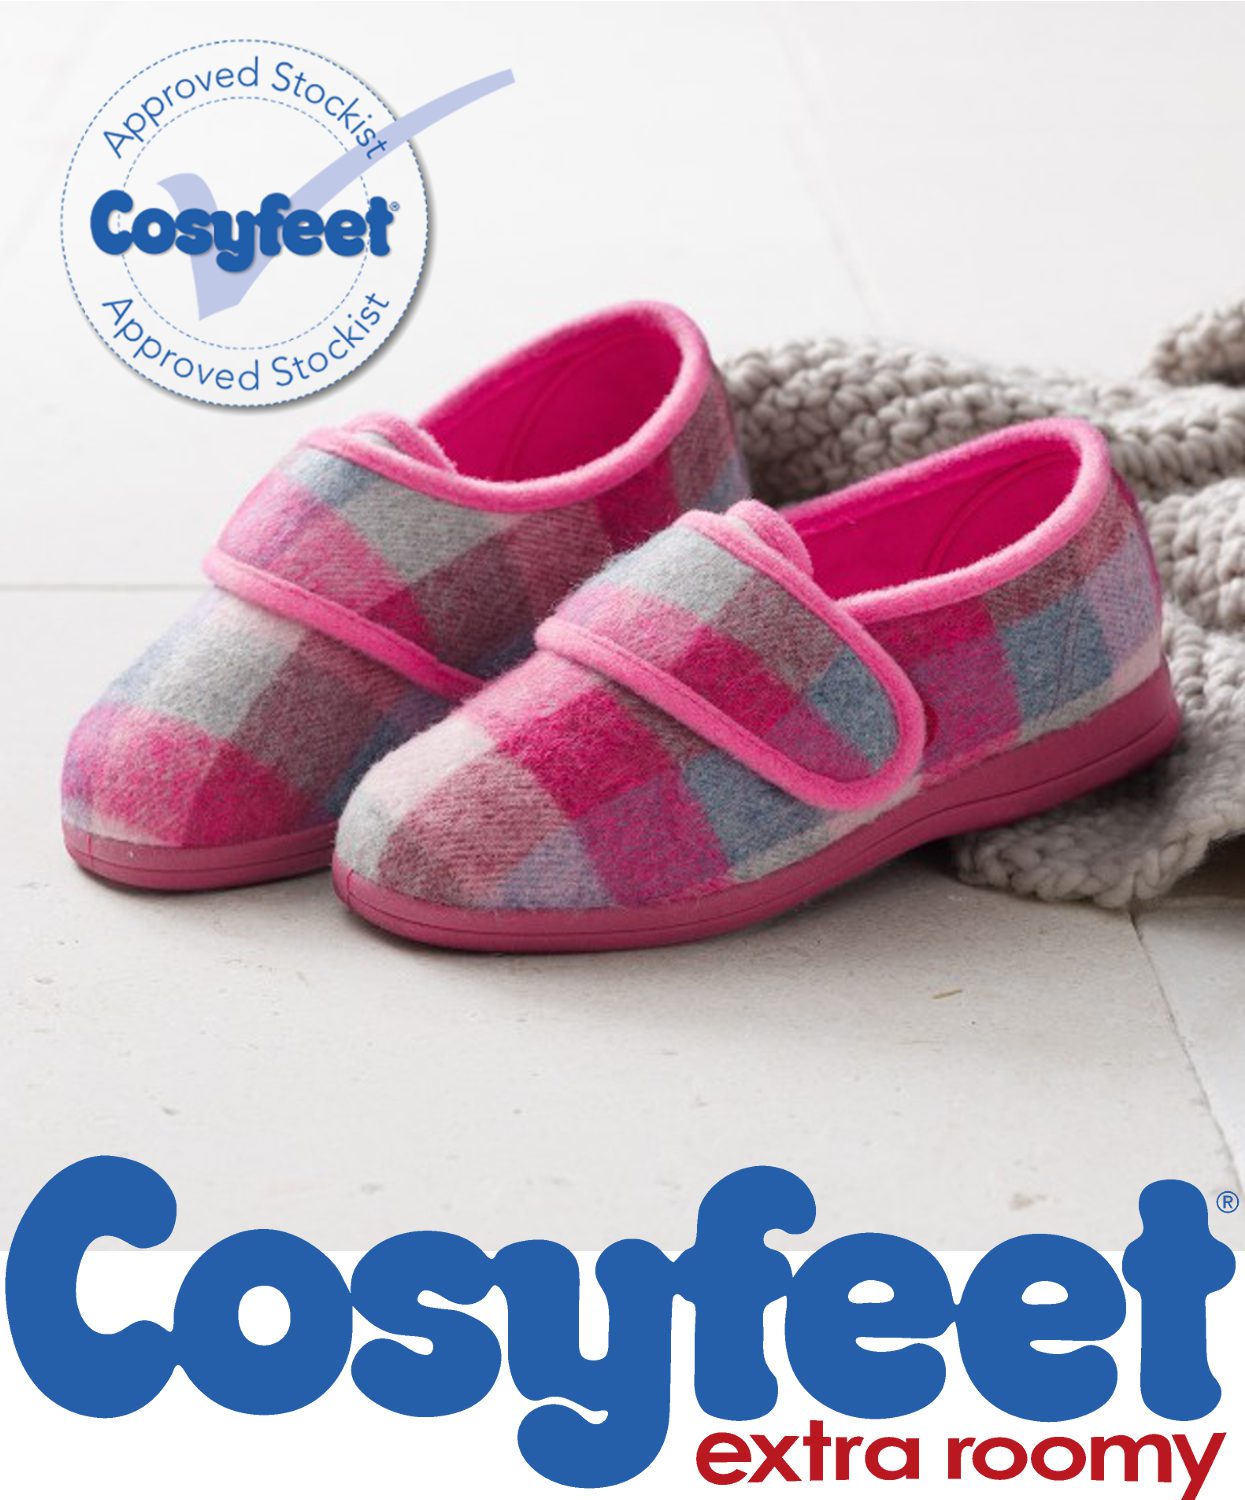 cosyfeet ladies shoes